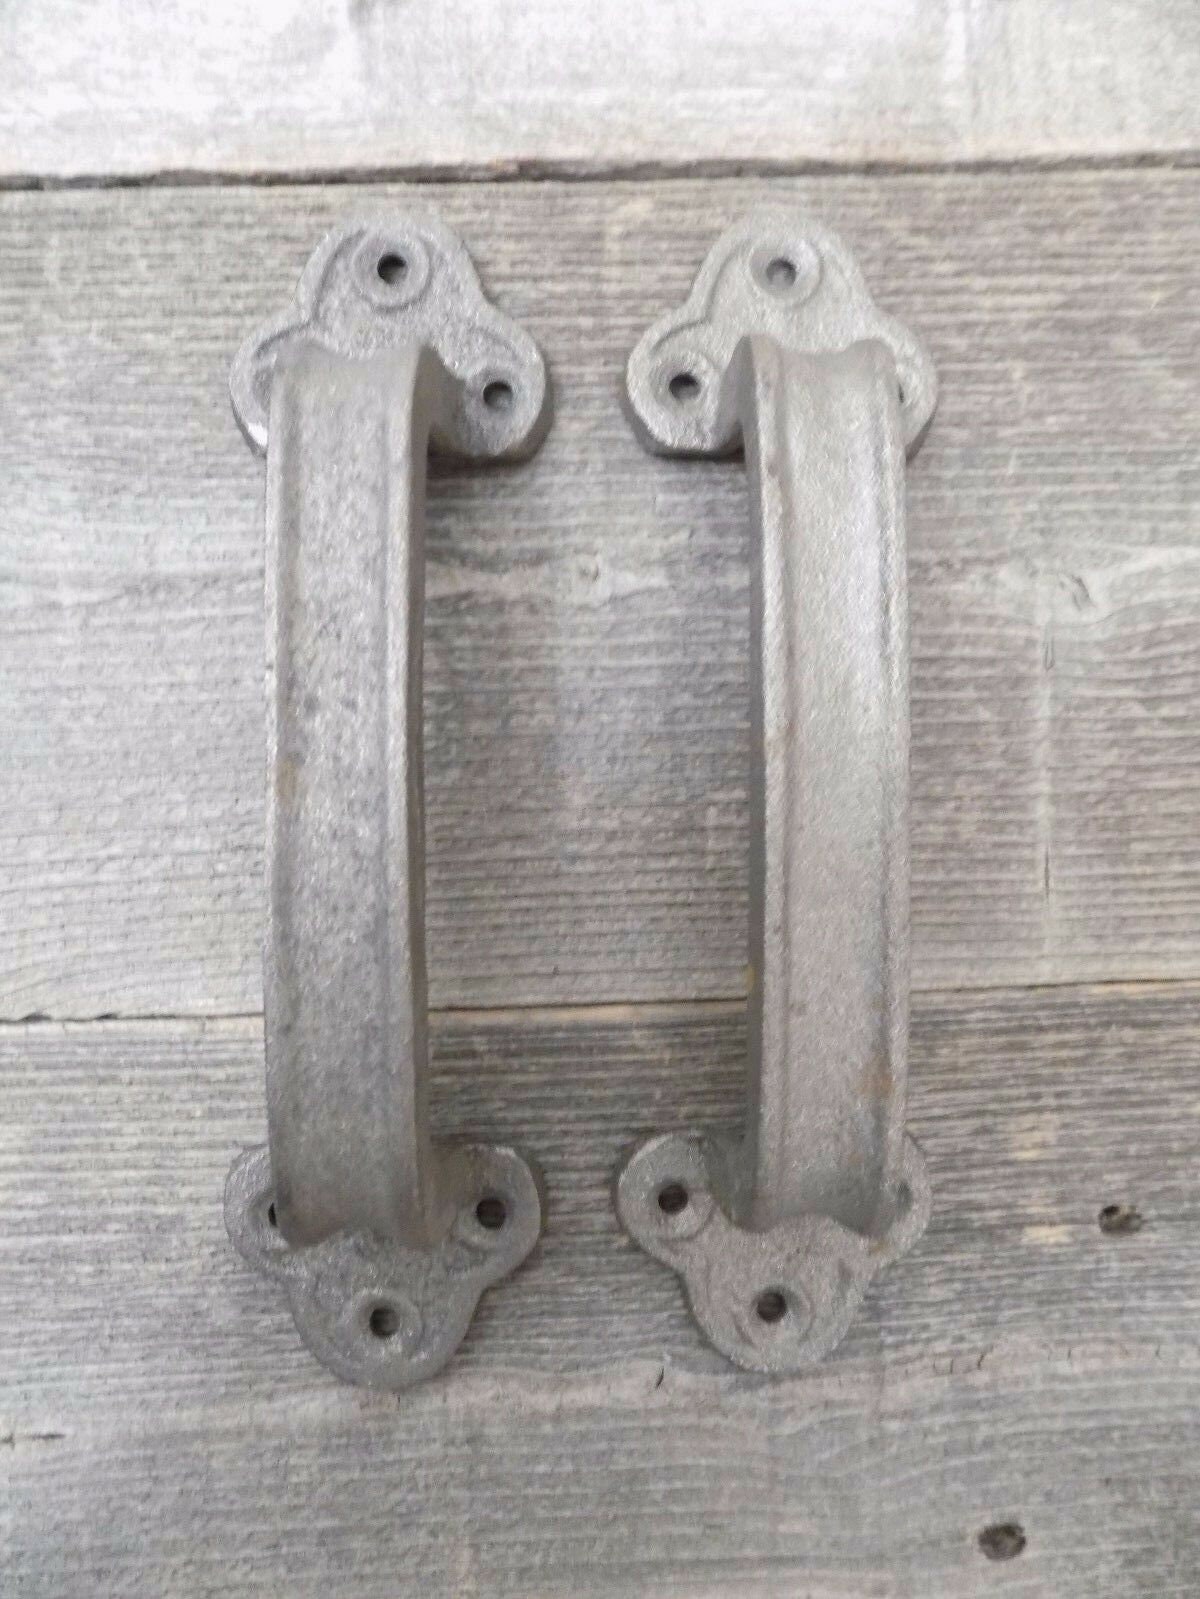 2 Cast Iron Handles Door Hardware Pull Gate Shed Drawer Cabinet Barn Shed Gate 